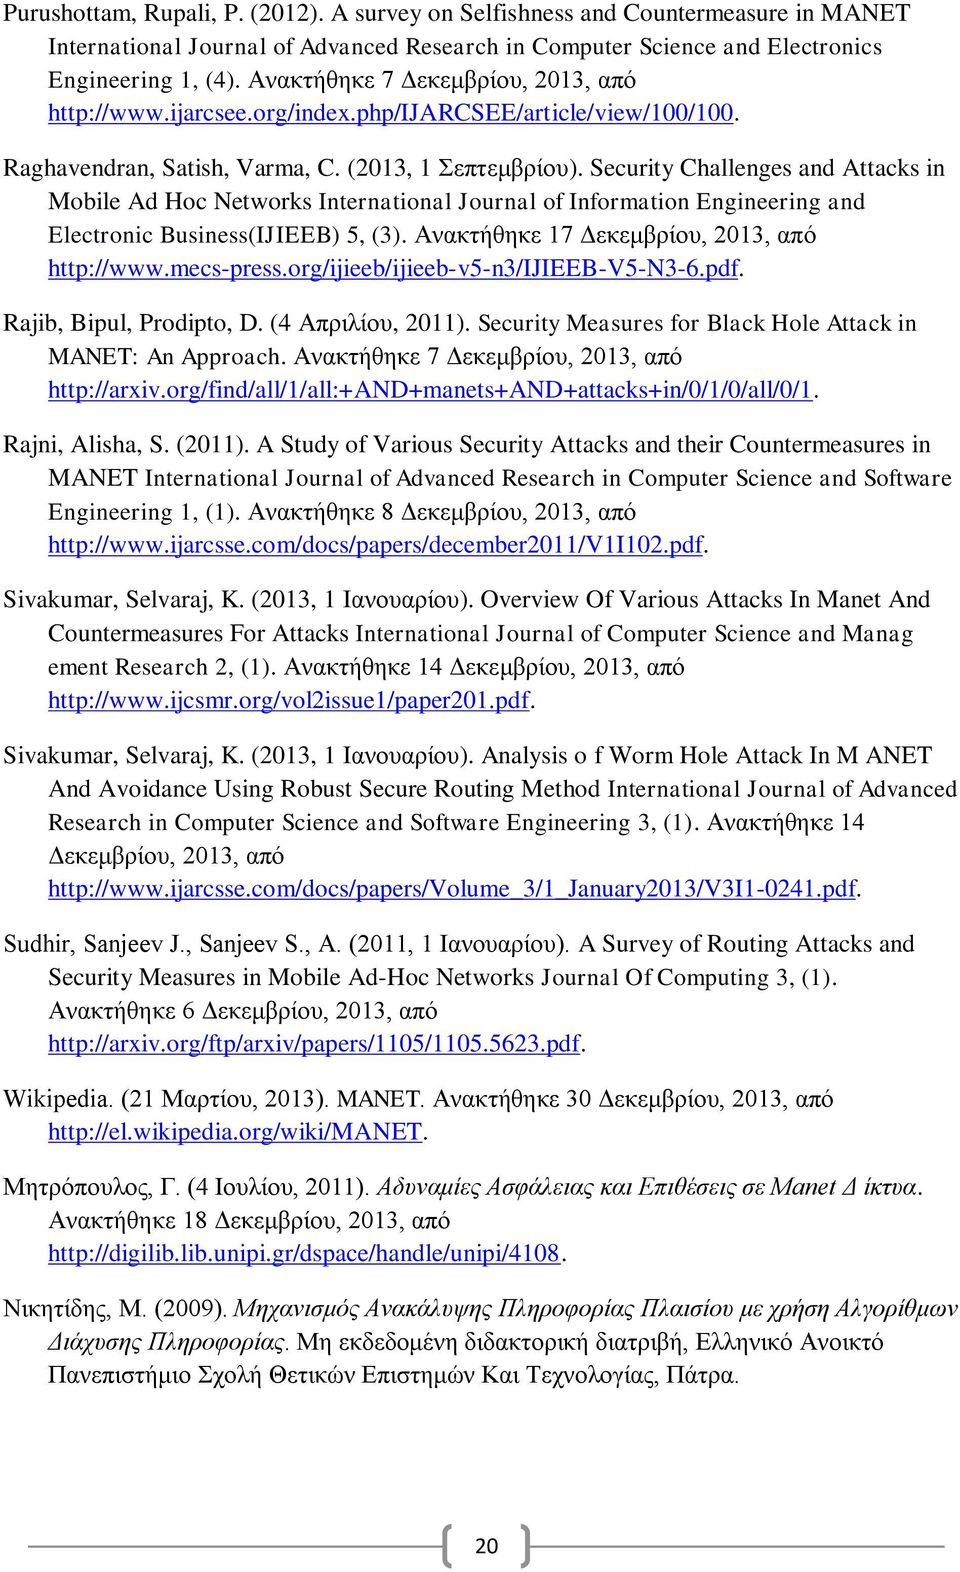 Security Challenges and Attacks in Mobile Ad Hoc Networks International Journal of Information Engineering and Electronic Business(IJIEEB) 5, (3). Ανακτήθηκε 17 Δεκεμβρίου, 2013, από http://www.